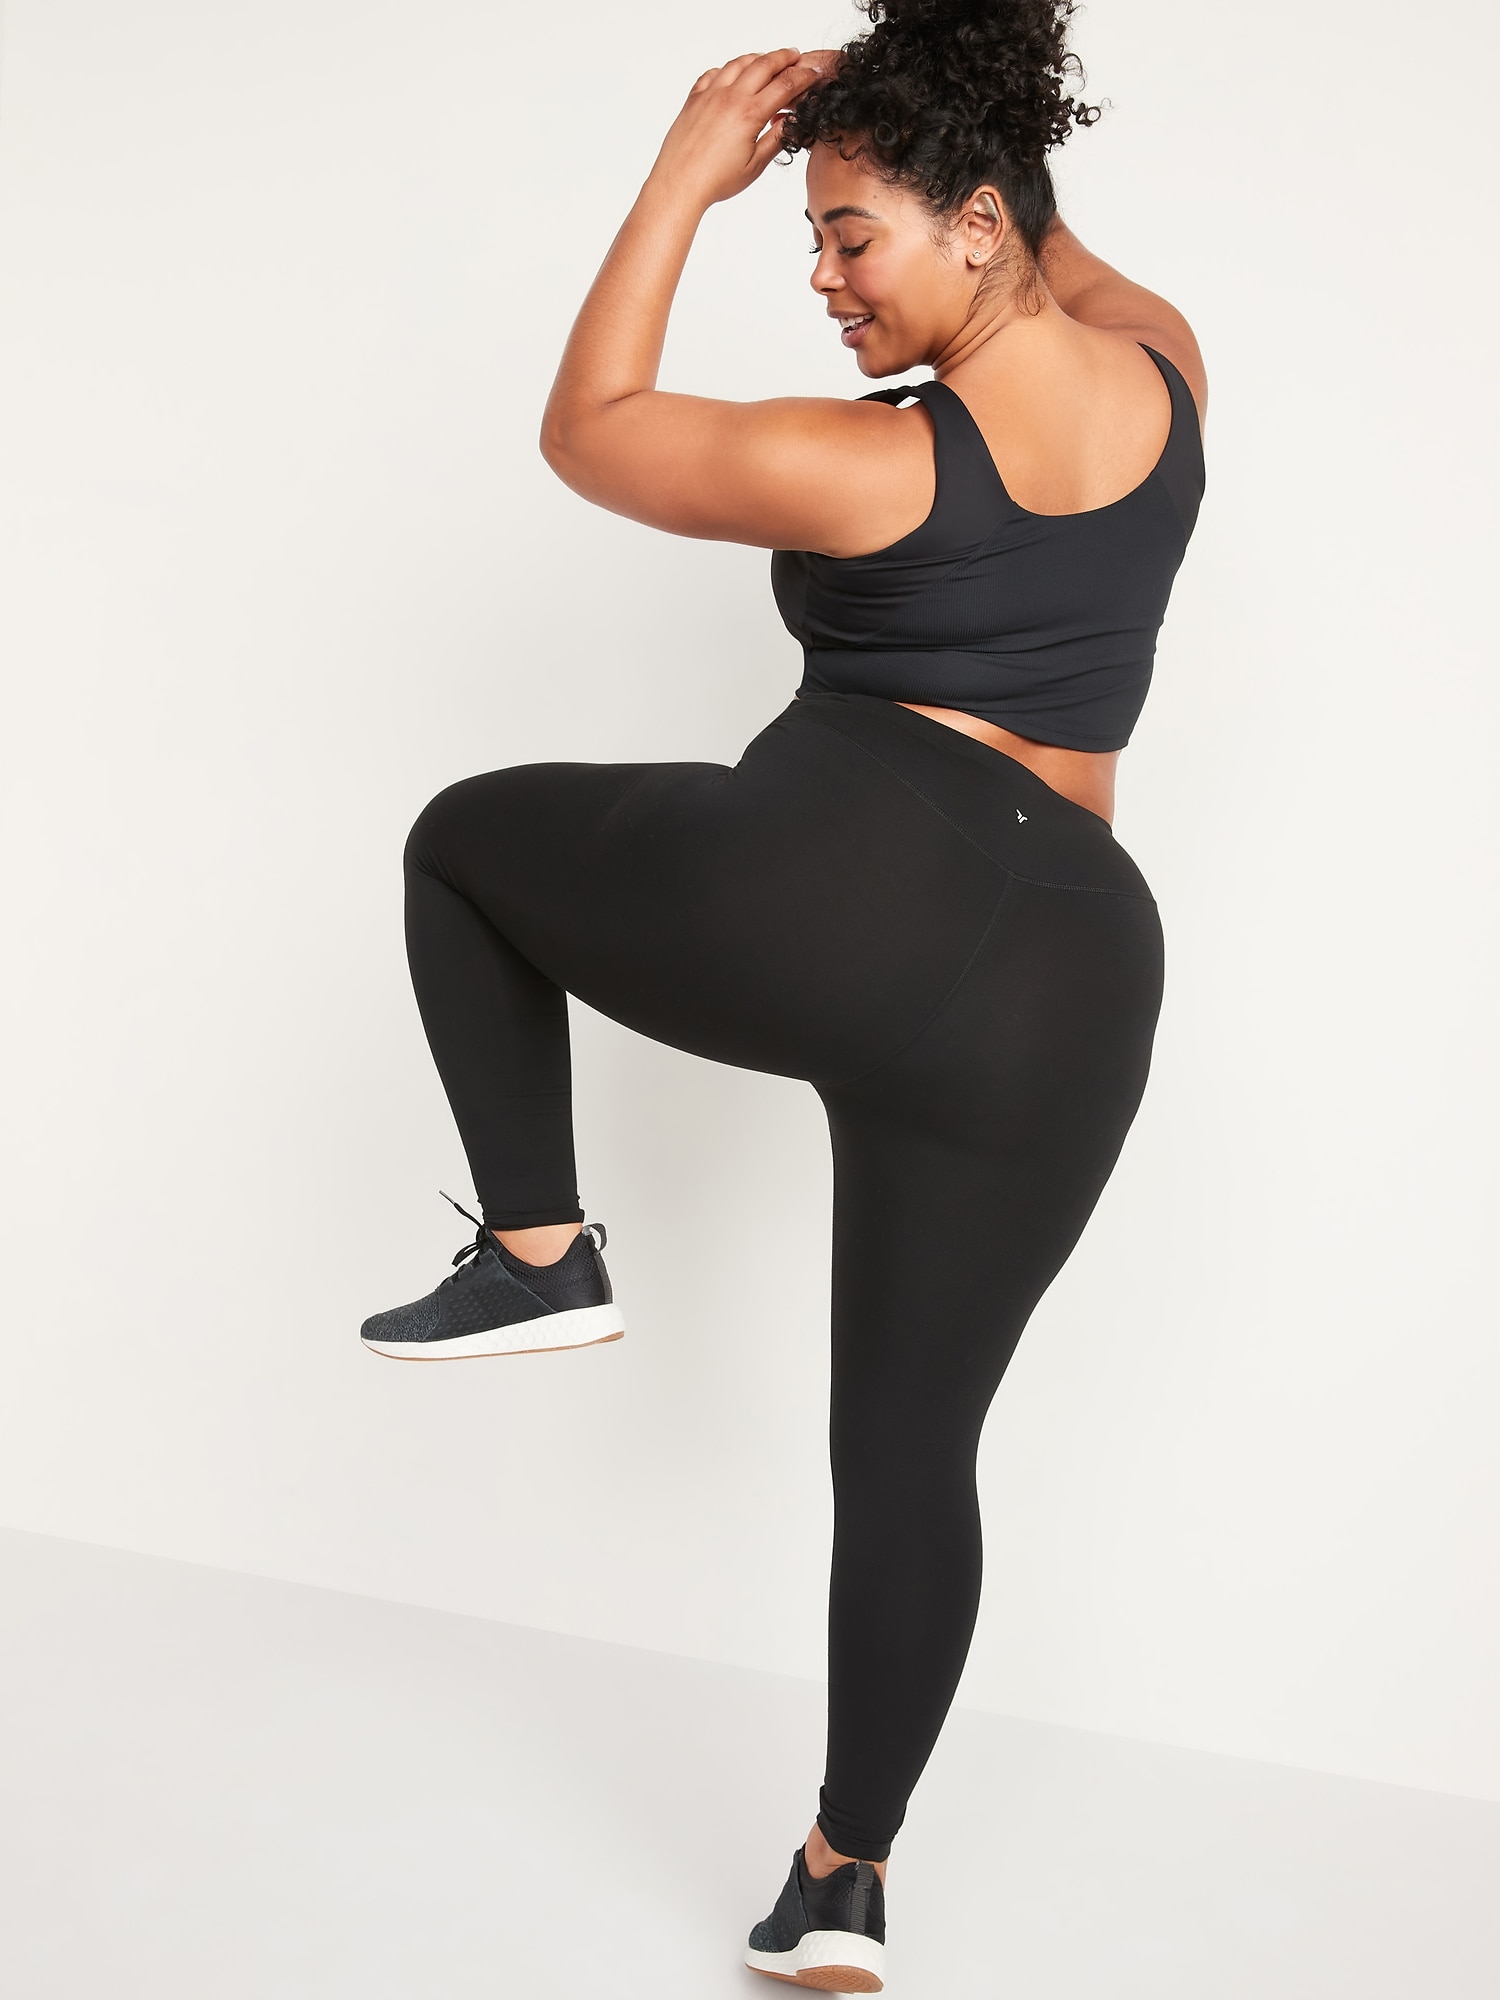 Old Navy Active Go Dry Black Leggings - $12 (60% Off Retail) - From chels